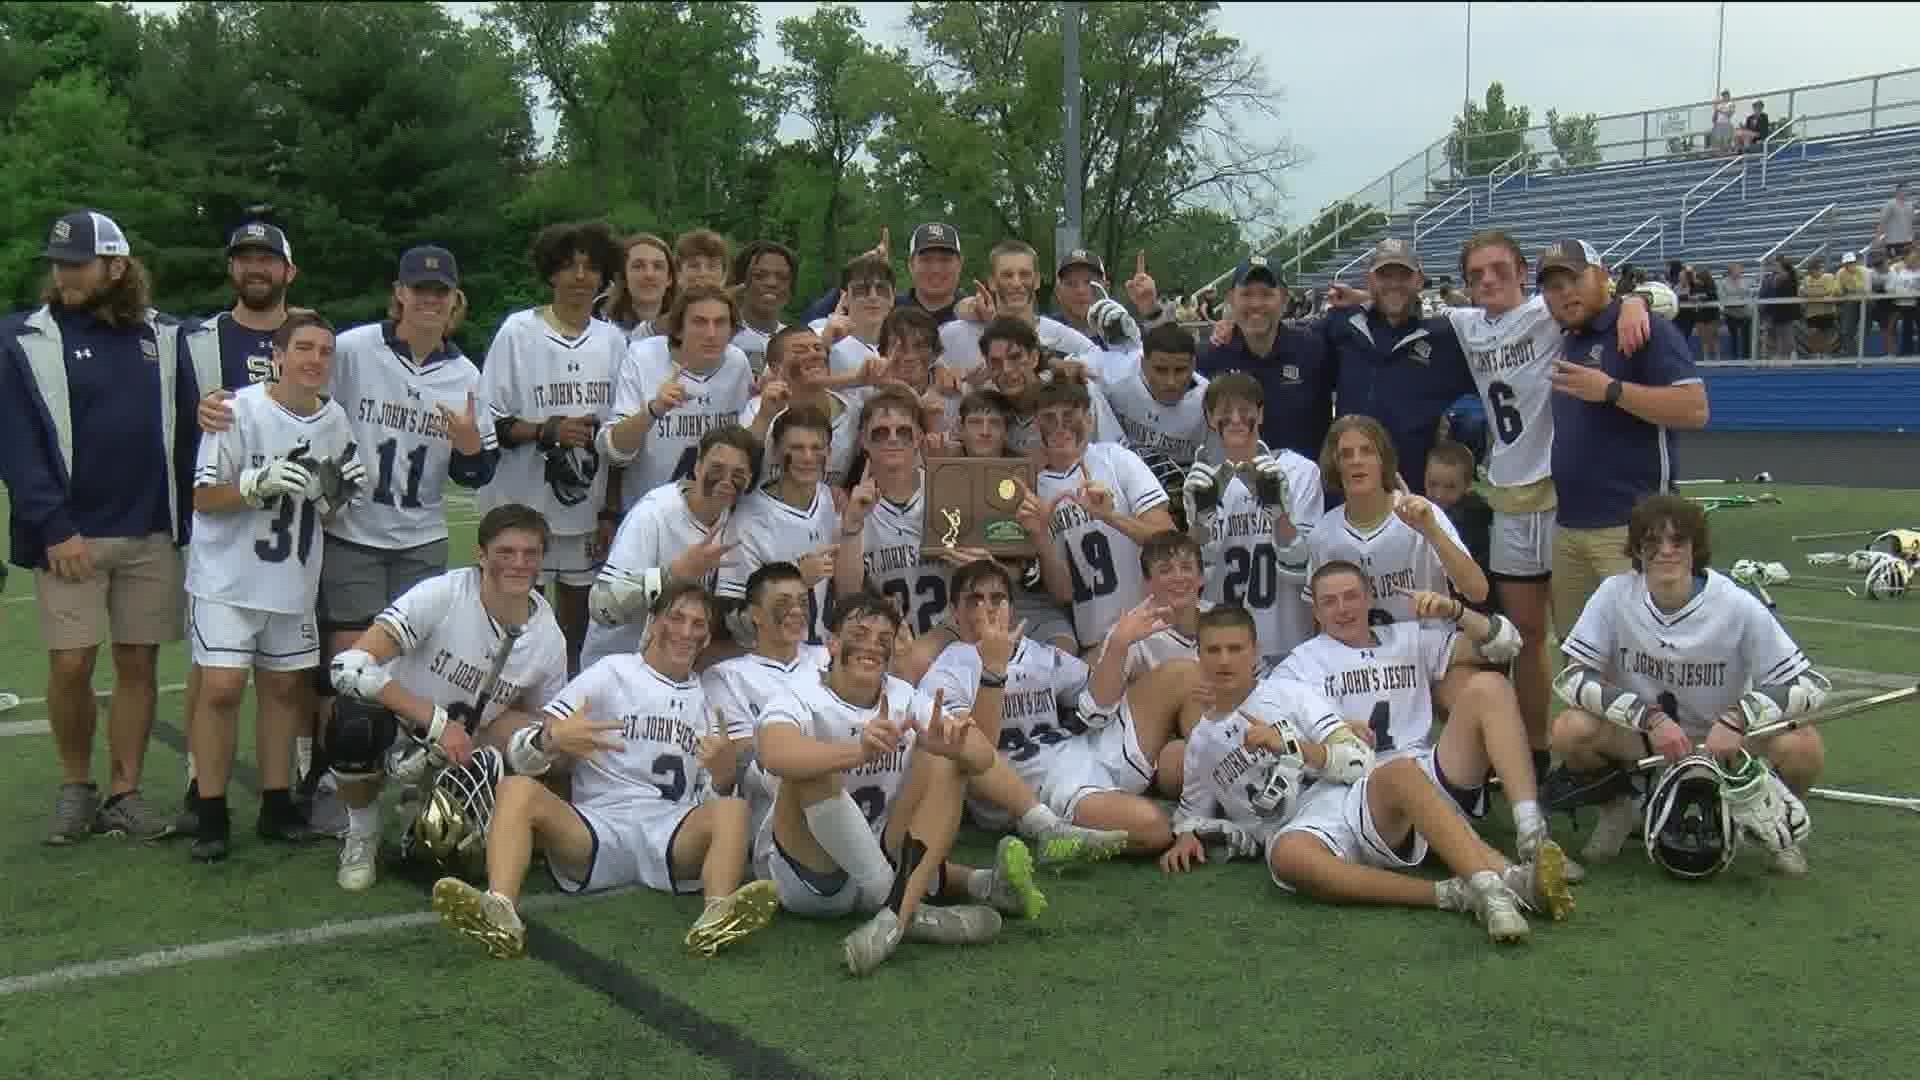 The Titans tied the game with six seconds left in regulation and Quinn Staten scored the game-winning goal in overtime to capture the regional title.